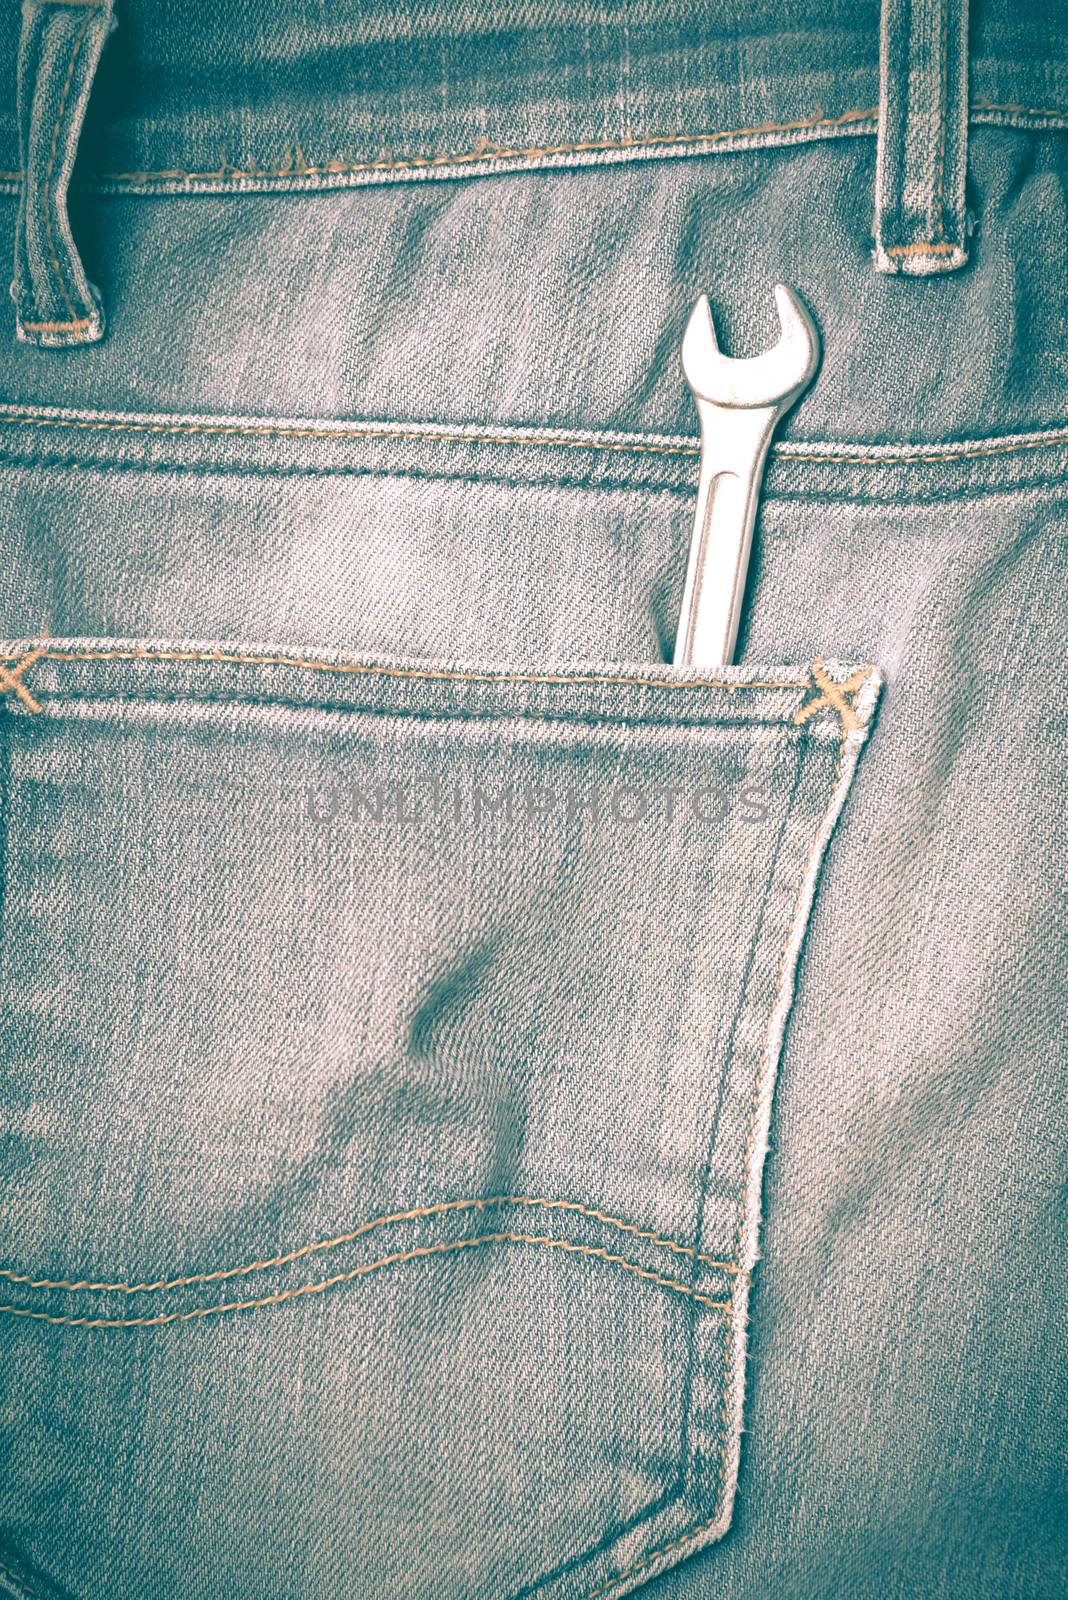 wrench tools in jean pants retro vintage style by ammza12